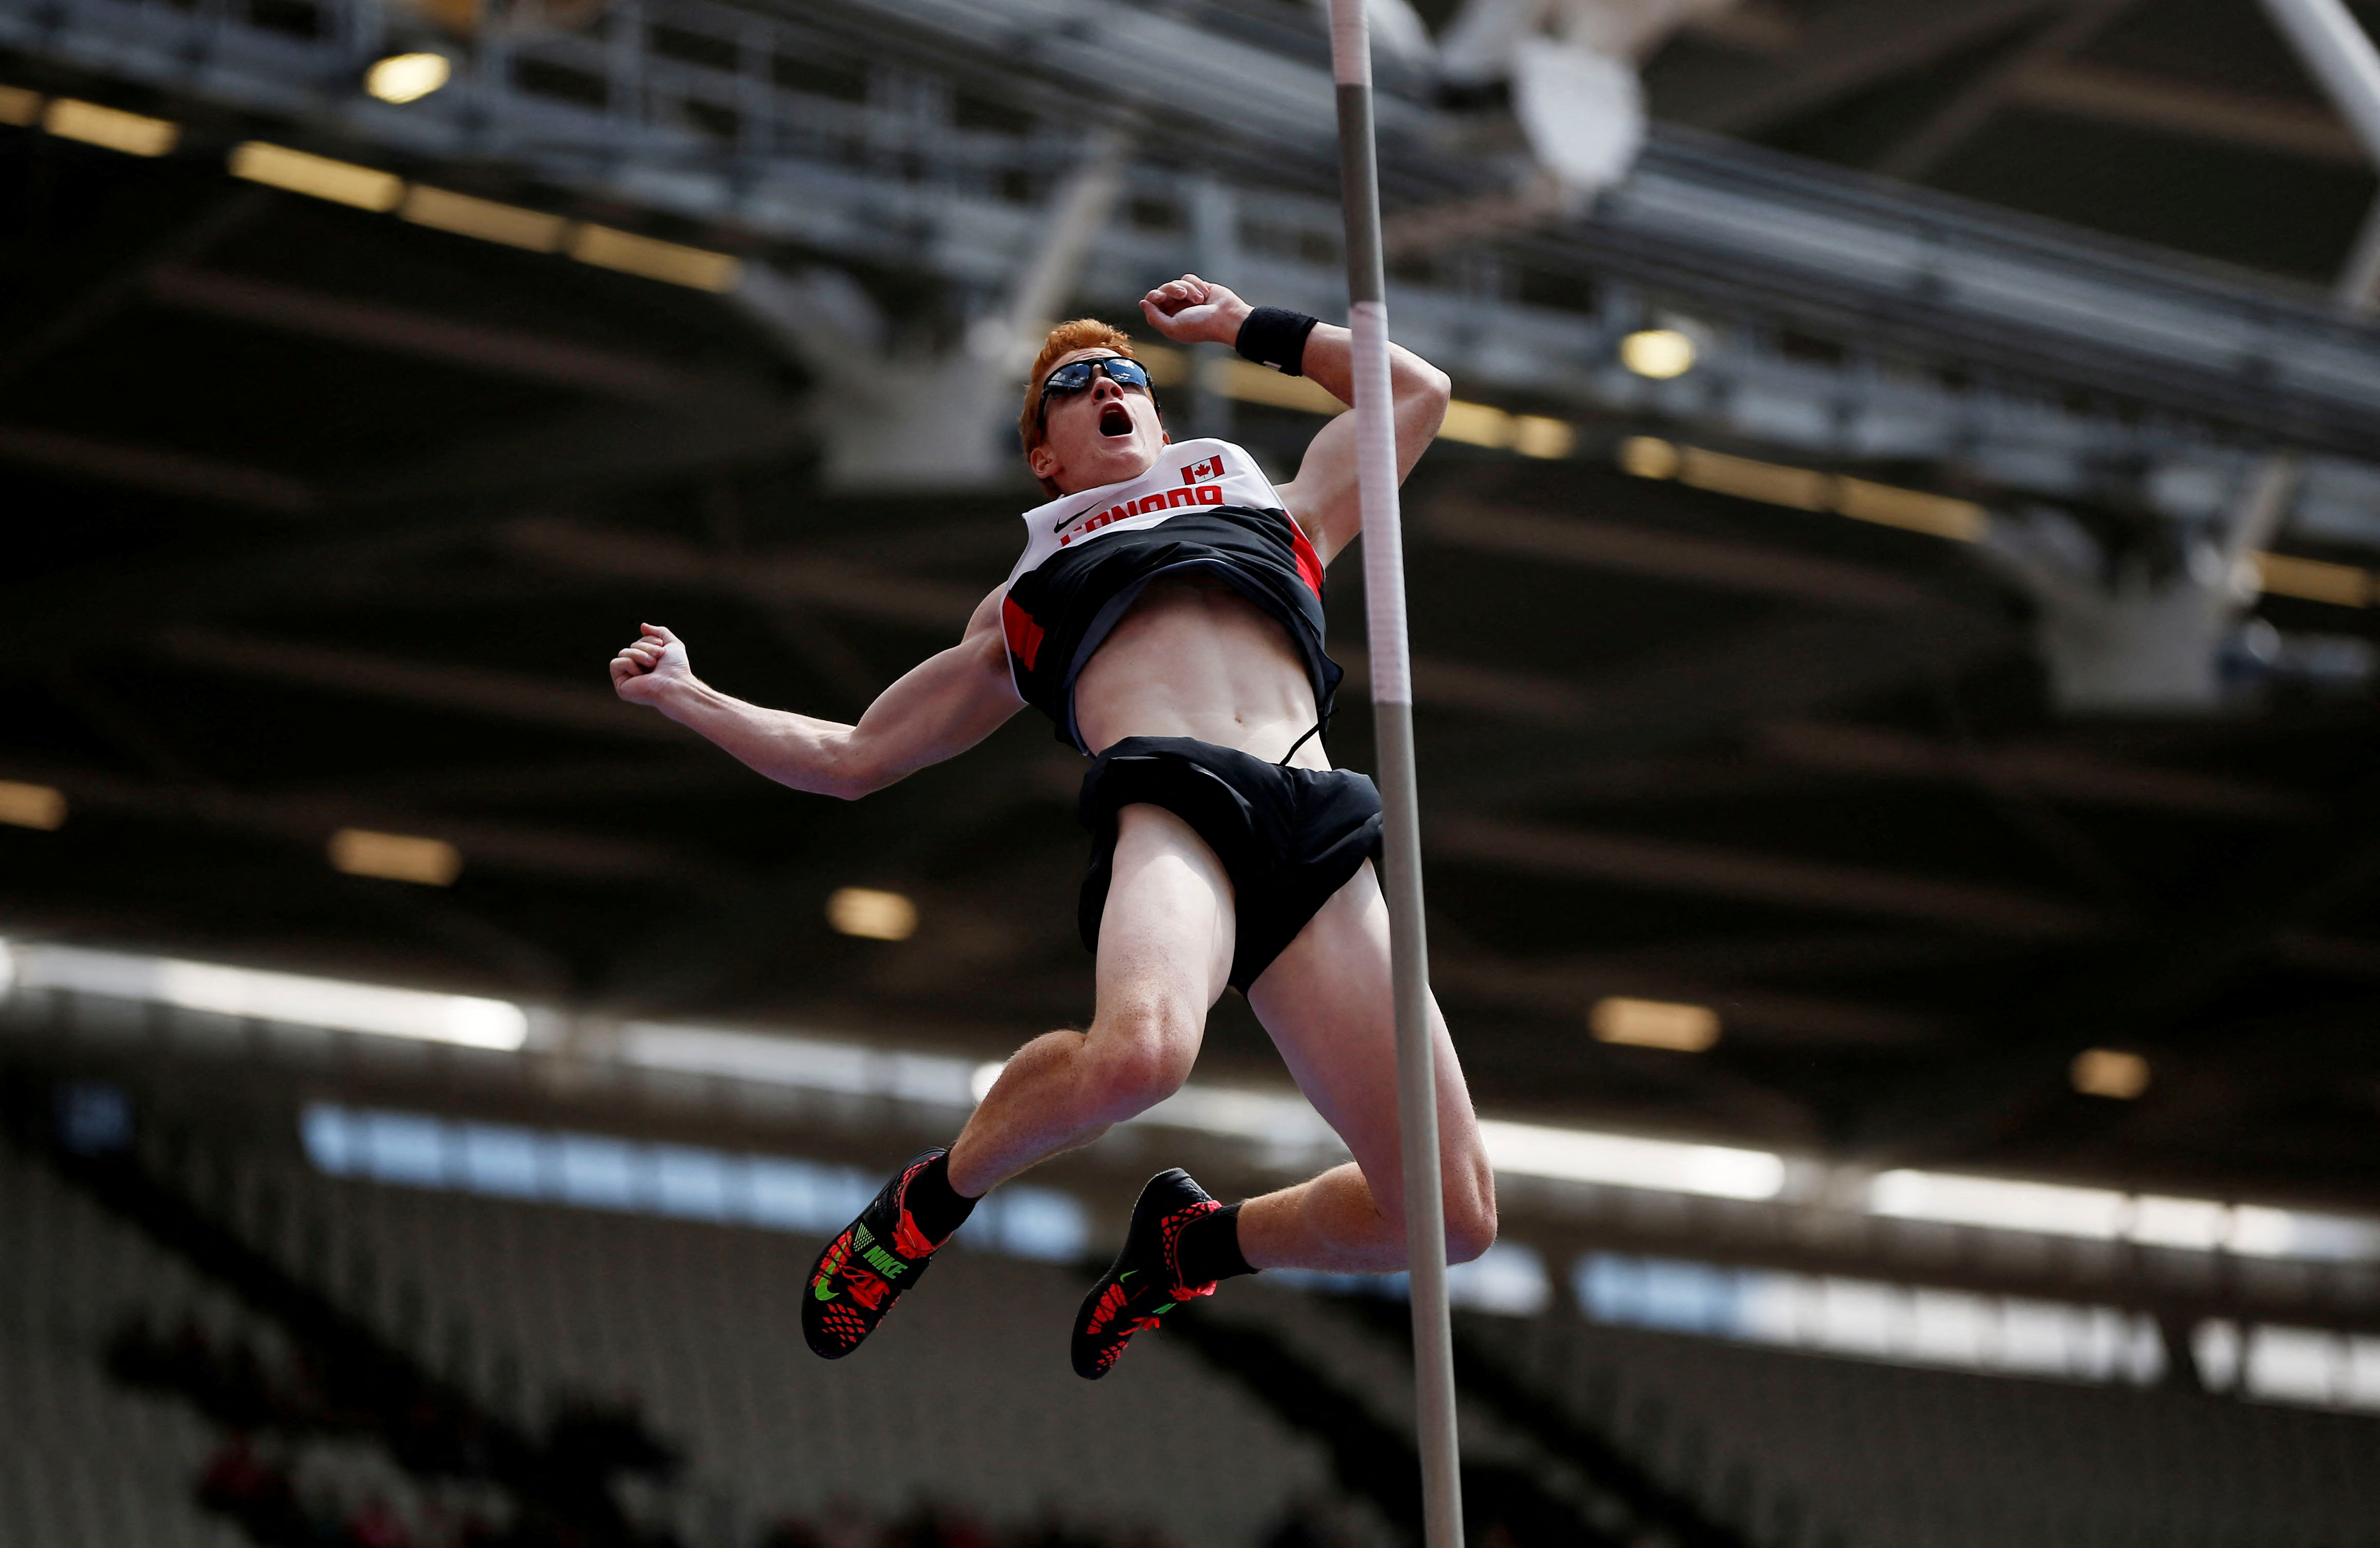 Former world pole vault champion Shawn Barber dies at age 29 | Reuters